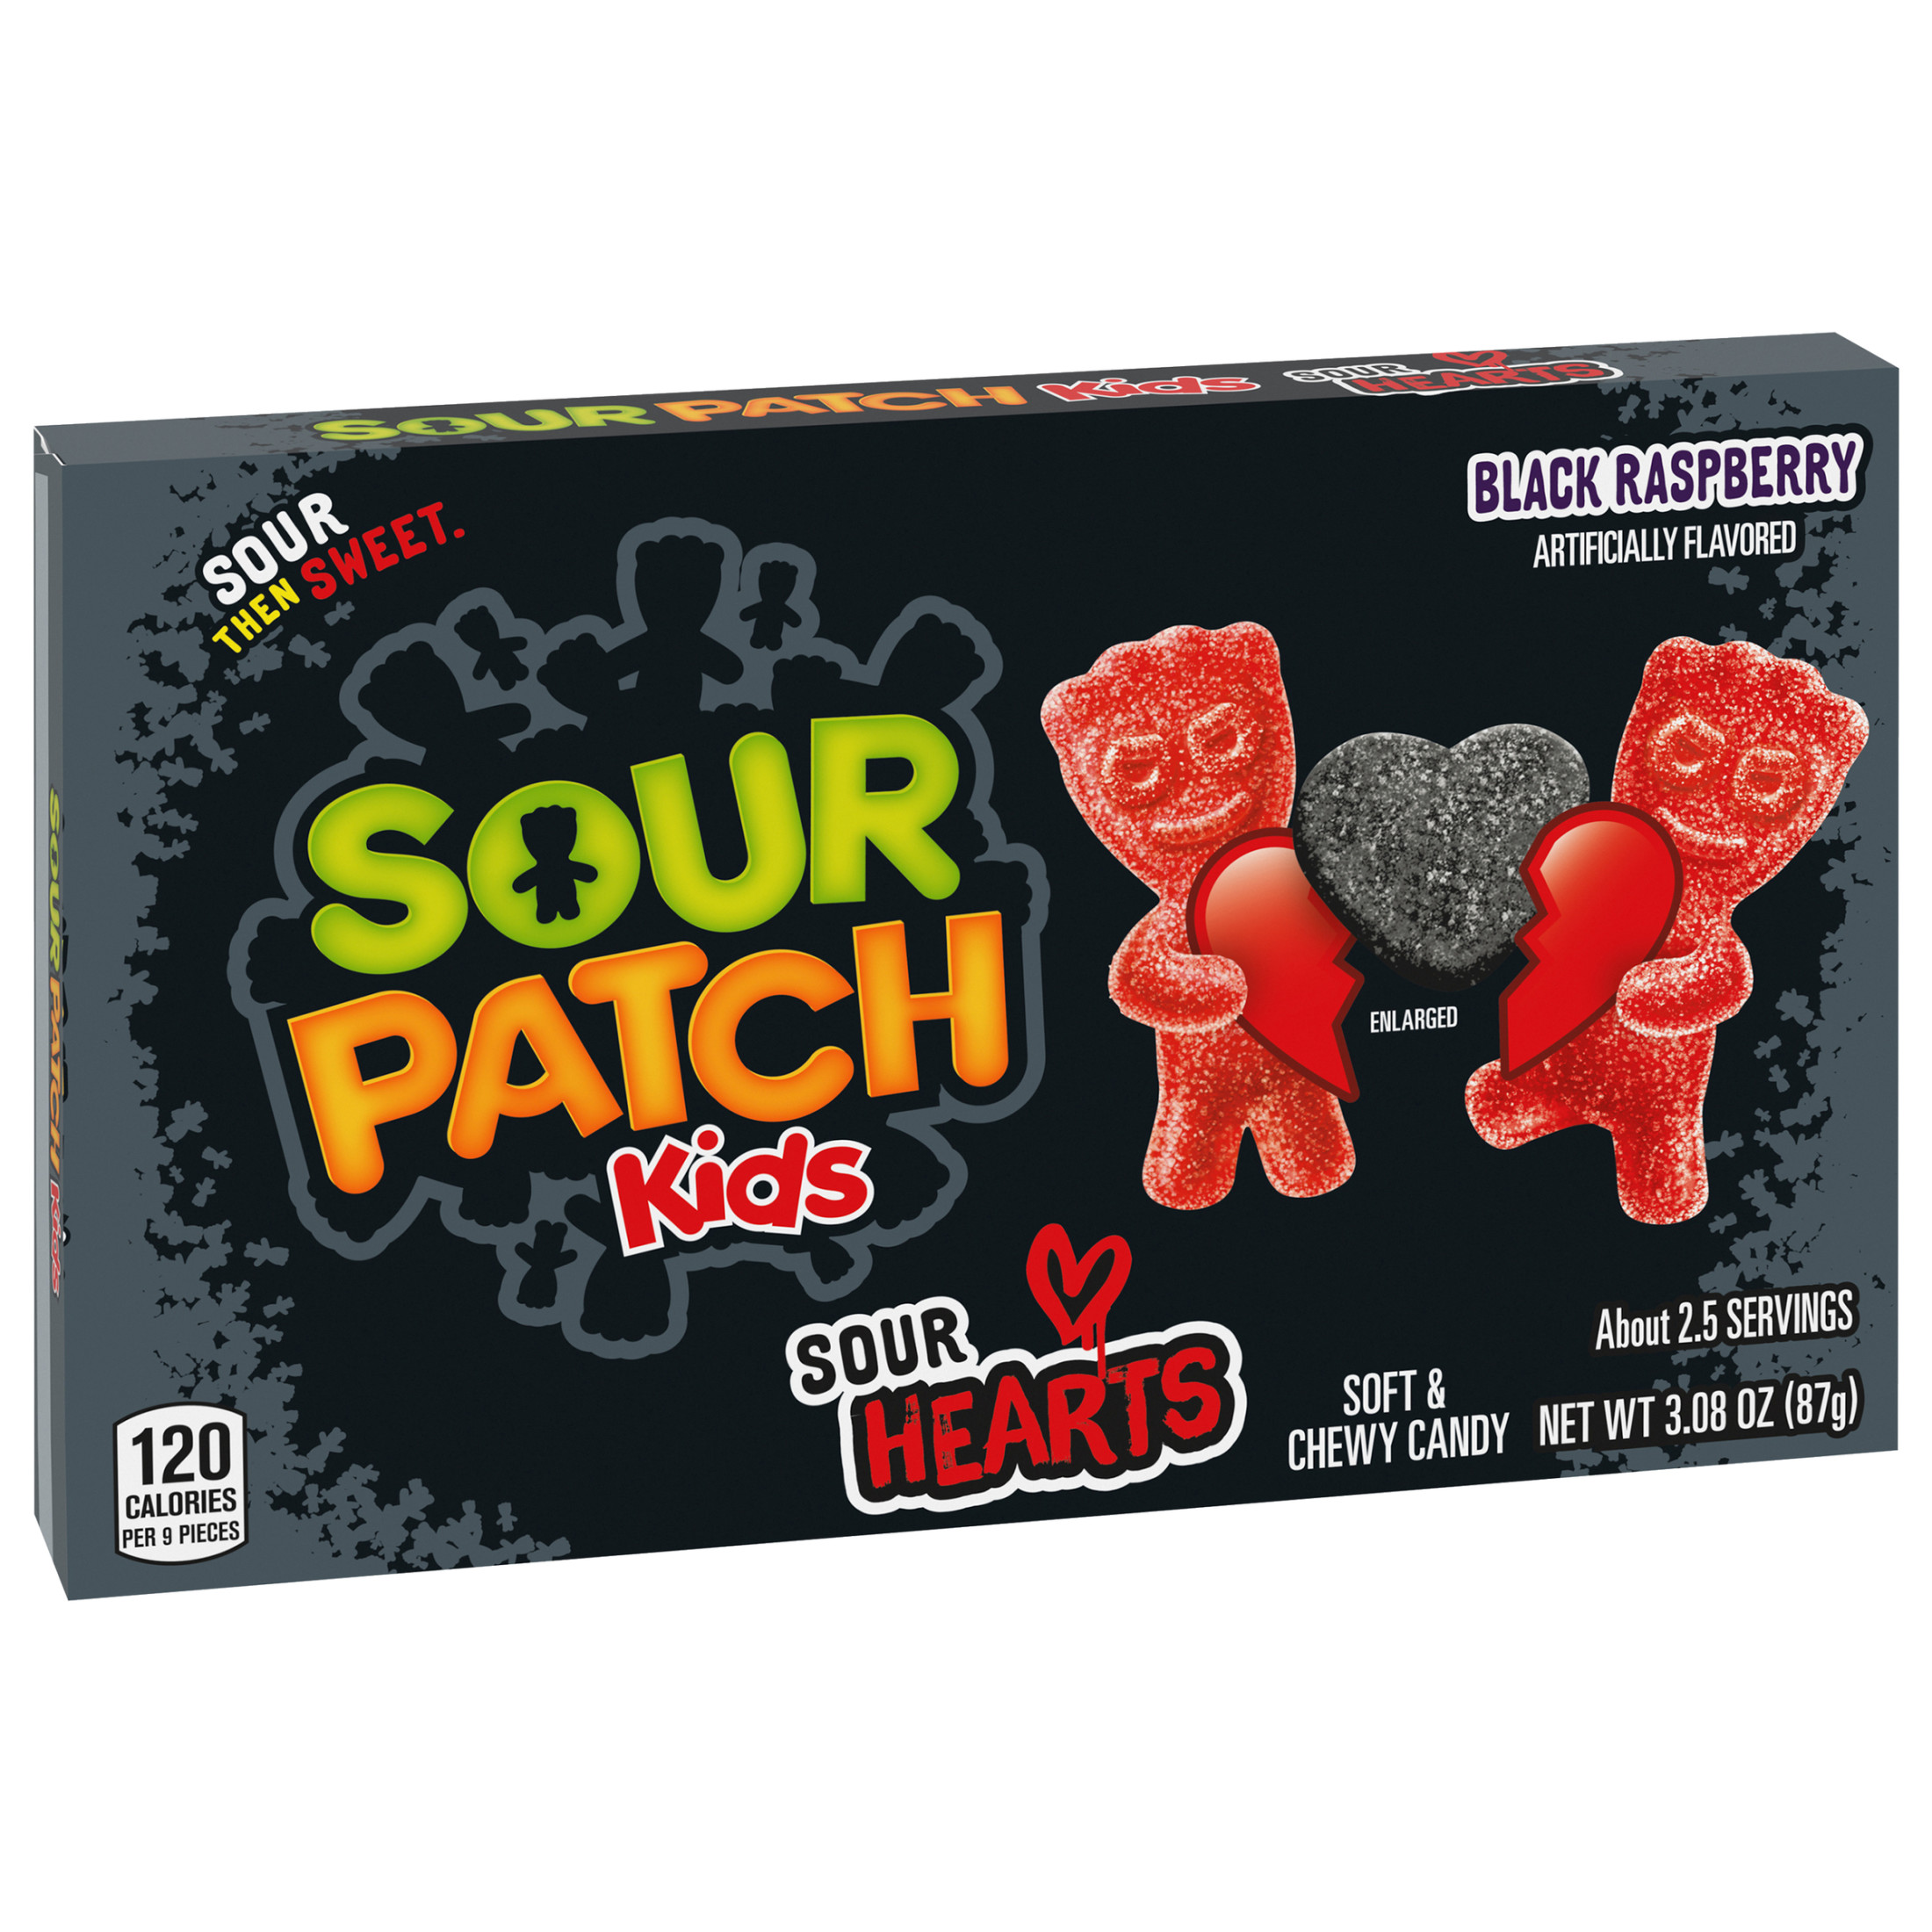 SOUR PATCH KIDS Sour Hearts Black Raspberry Soft & Chewy Candy, Valentines Candy, 3.08 oz - image 2 of 10